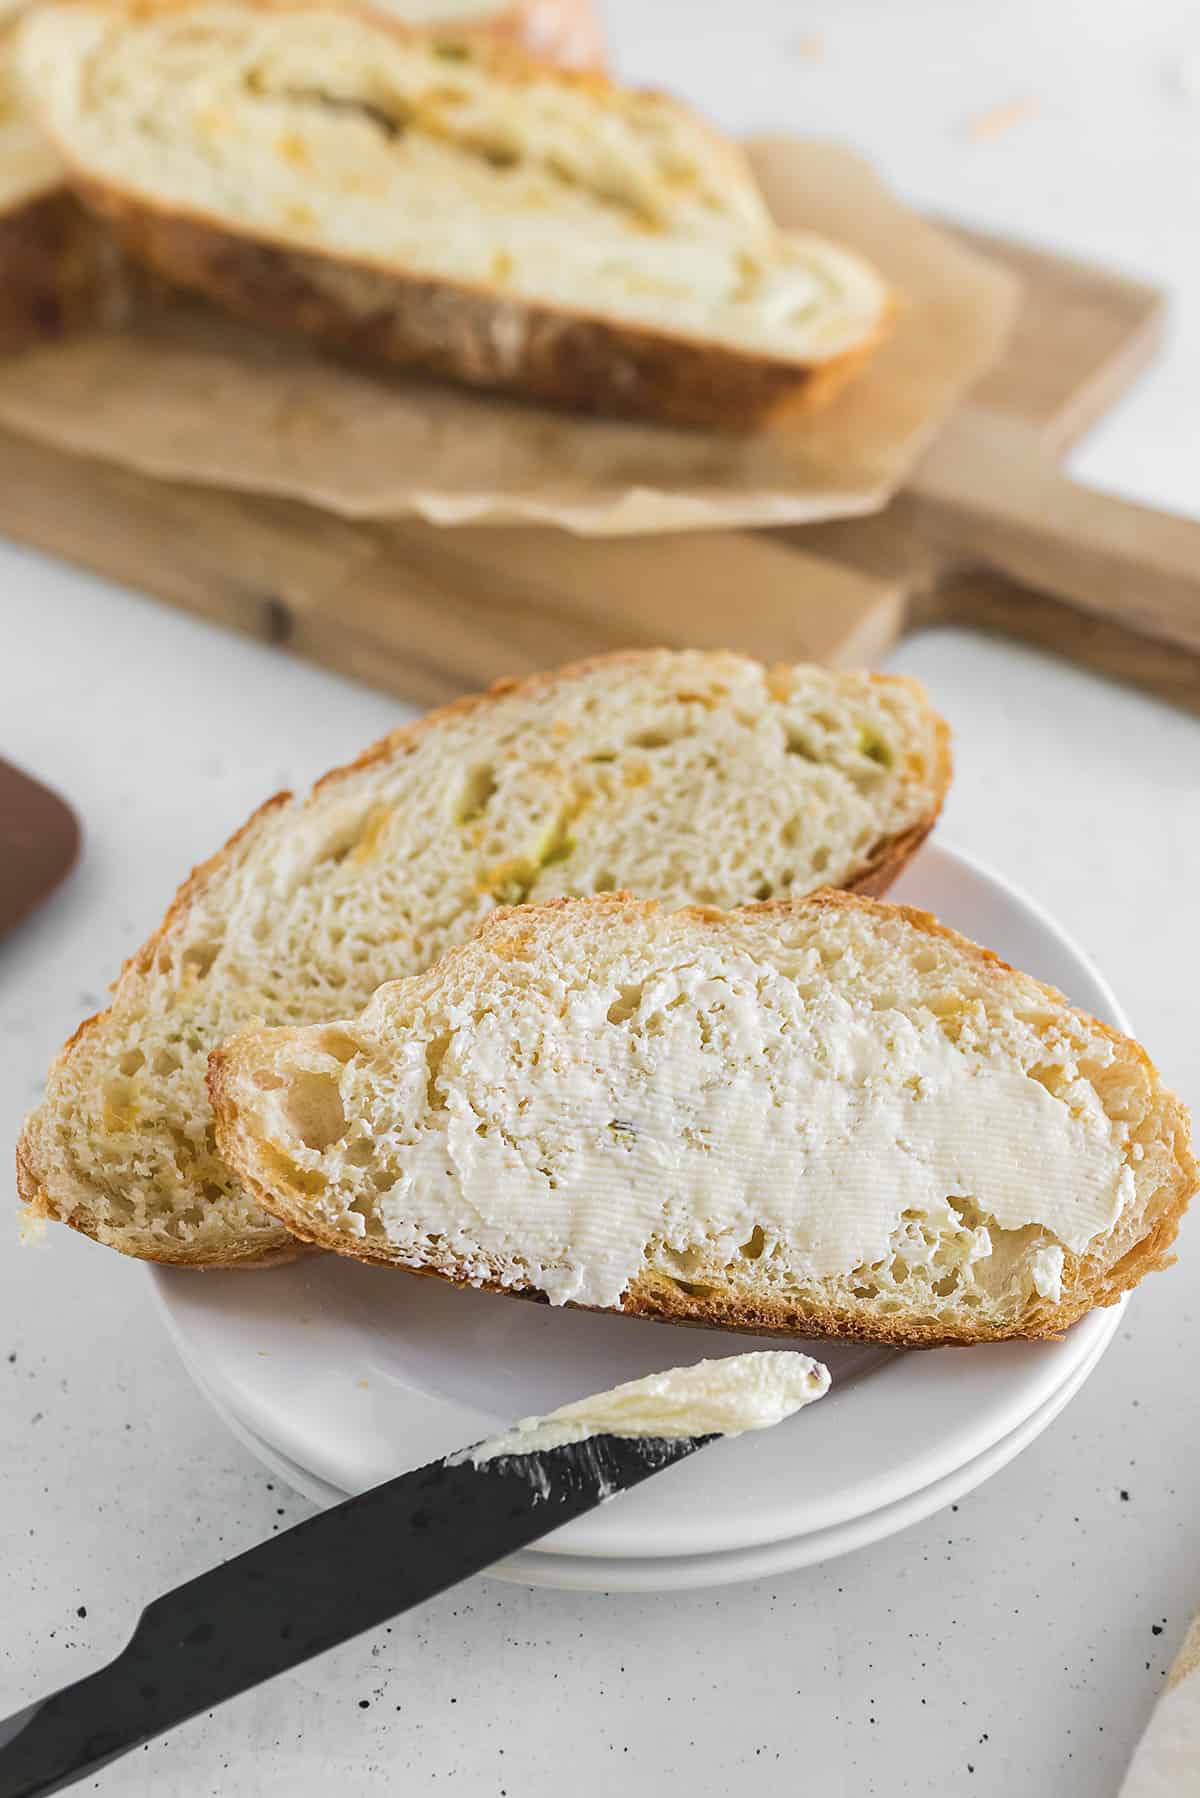 Sliced bread spread with butter.